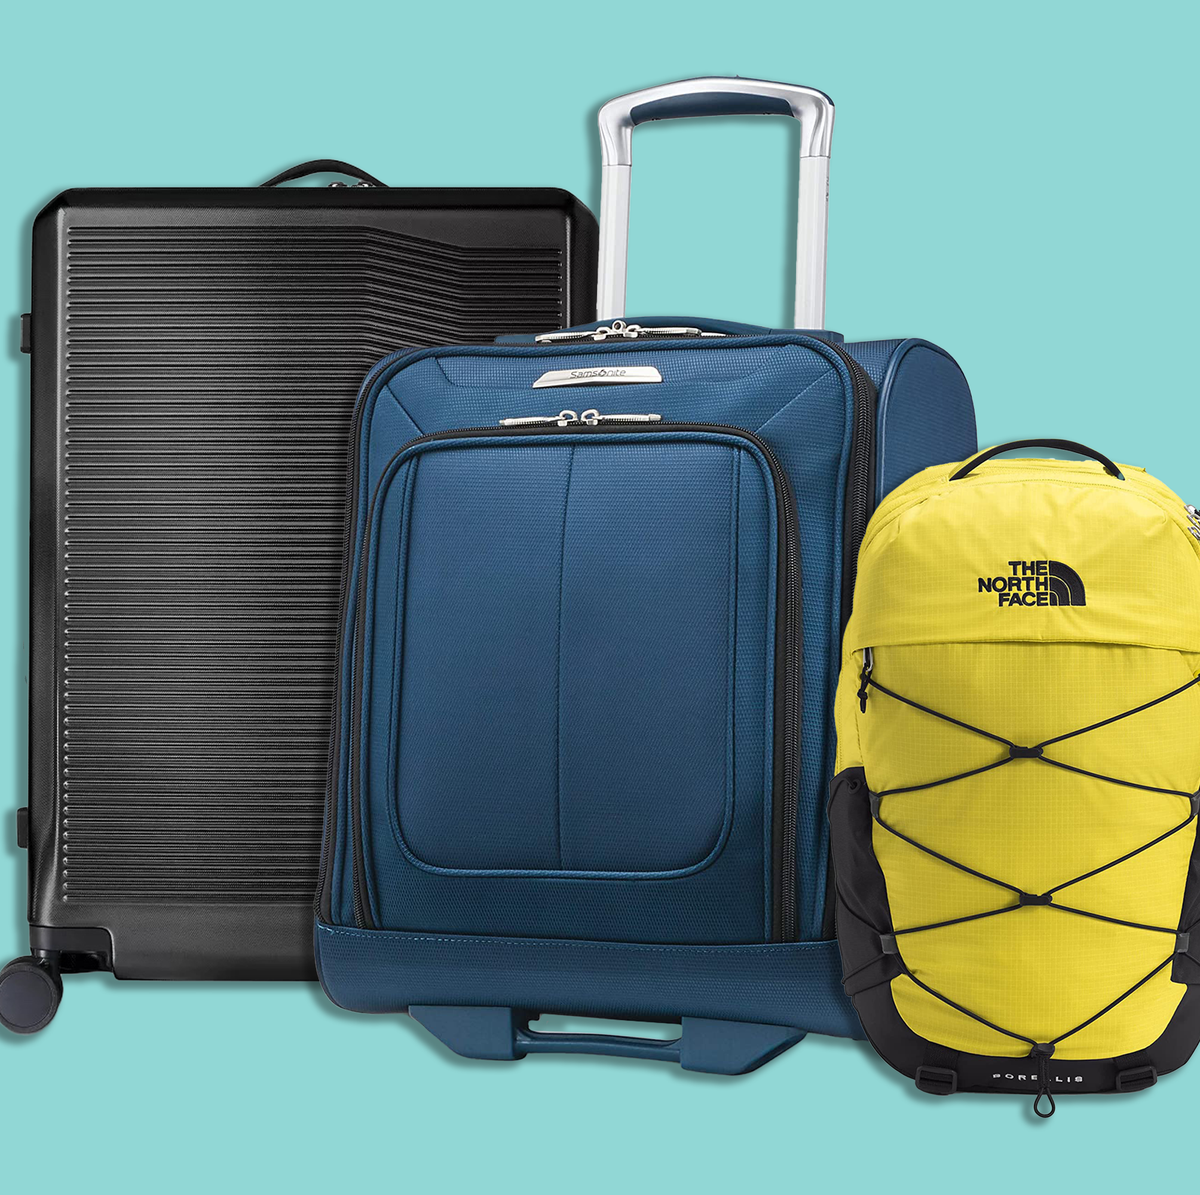 the best travel gear and accessories for your next adventure, according to experts